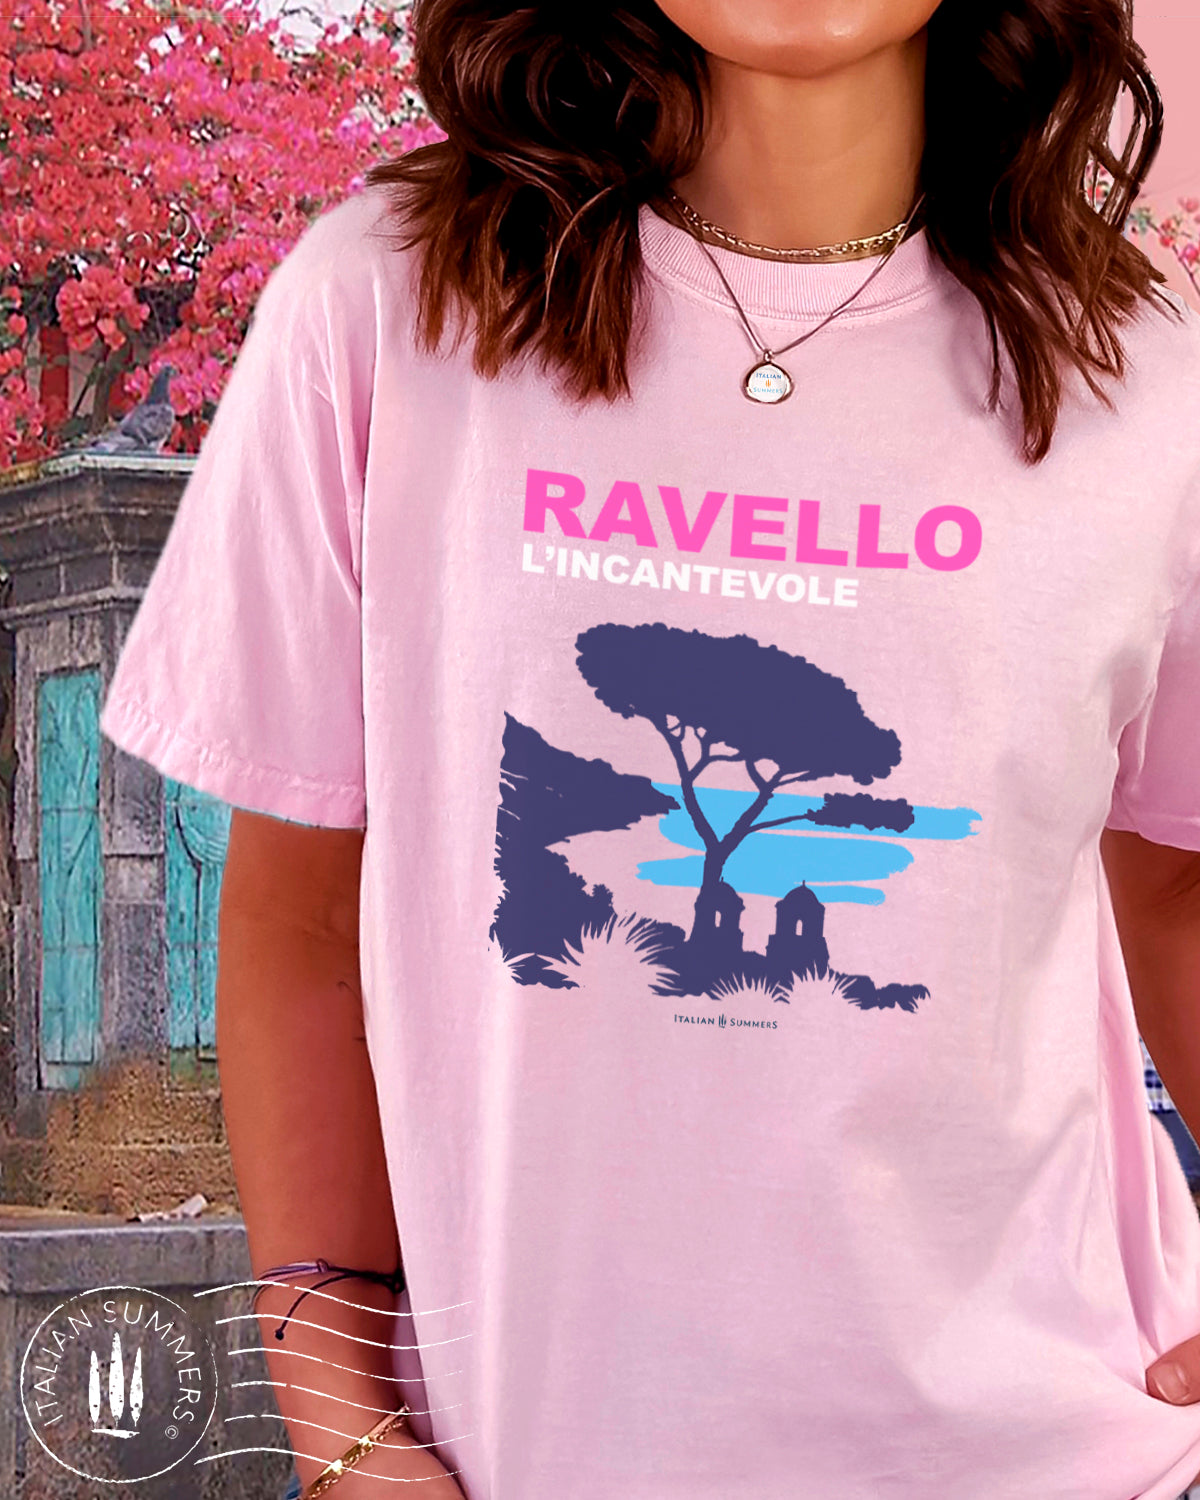 Italy-inspired garment dyed T shirt with a print of the Amalfi Coast location of Ravello with the quote of "Ravello, l'incantevole"  Ravello the enchanting. Made by Italian Summers